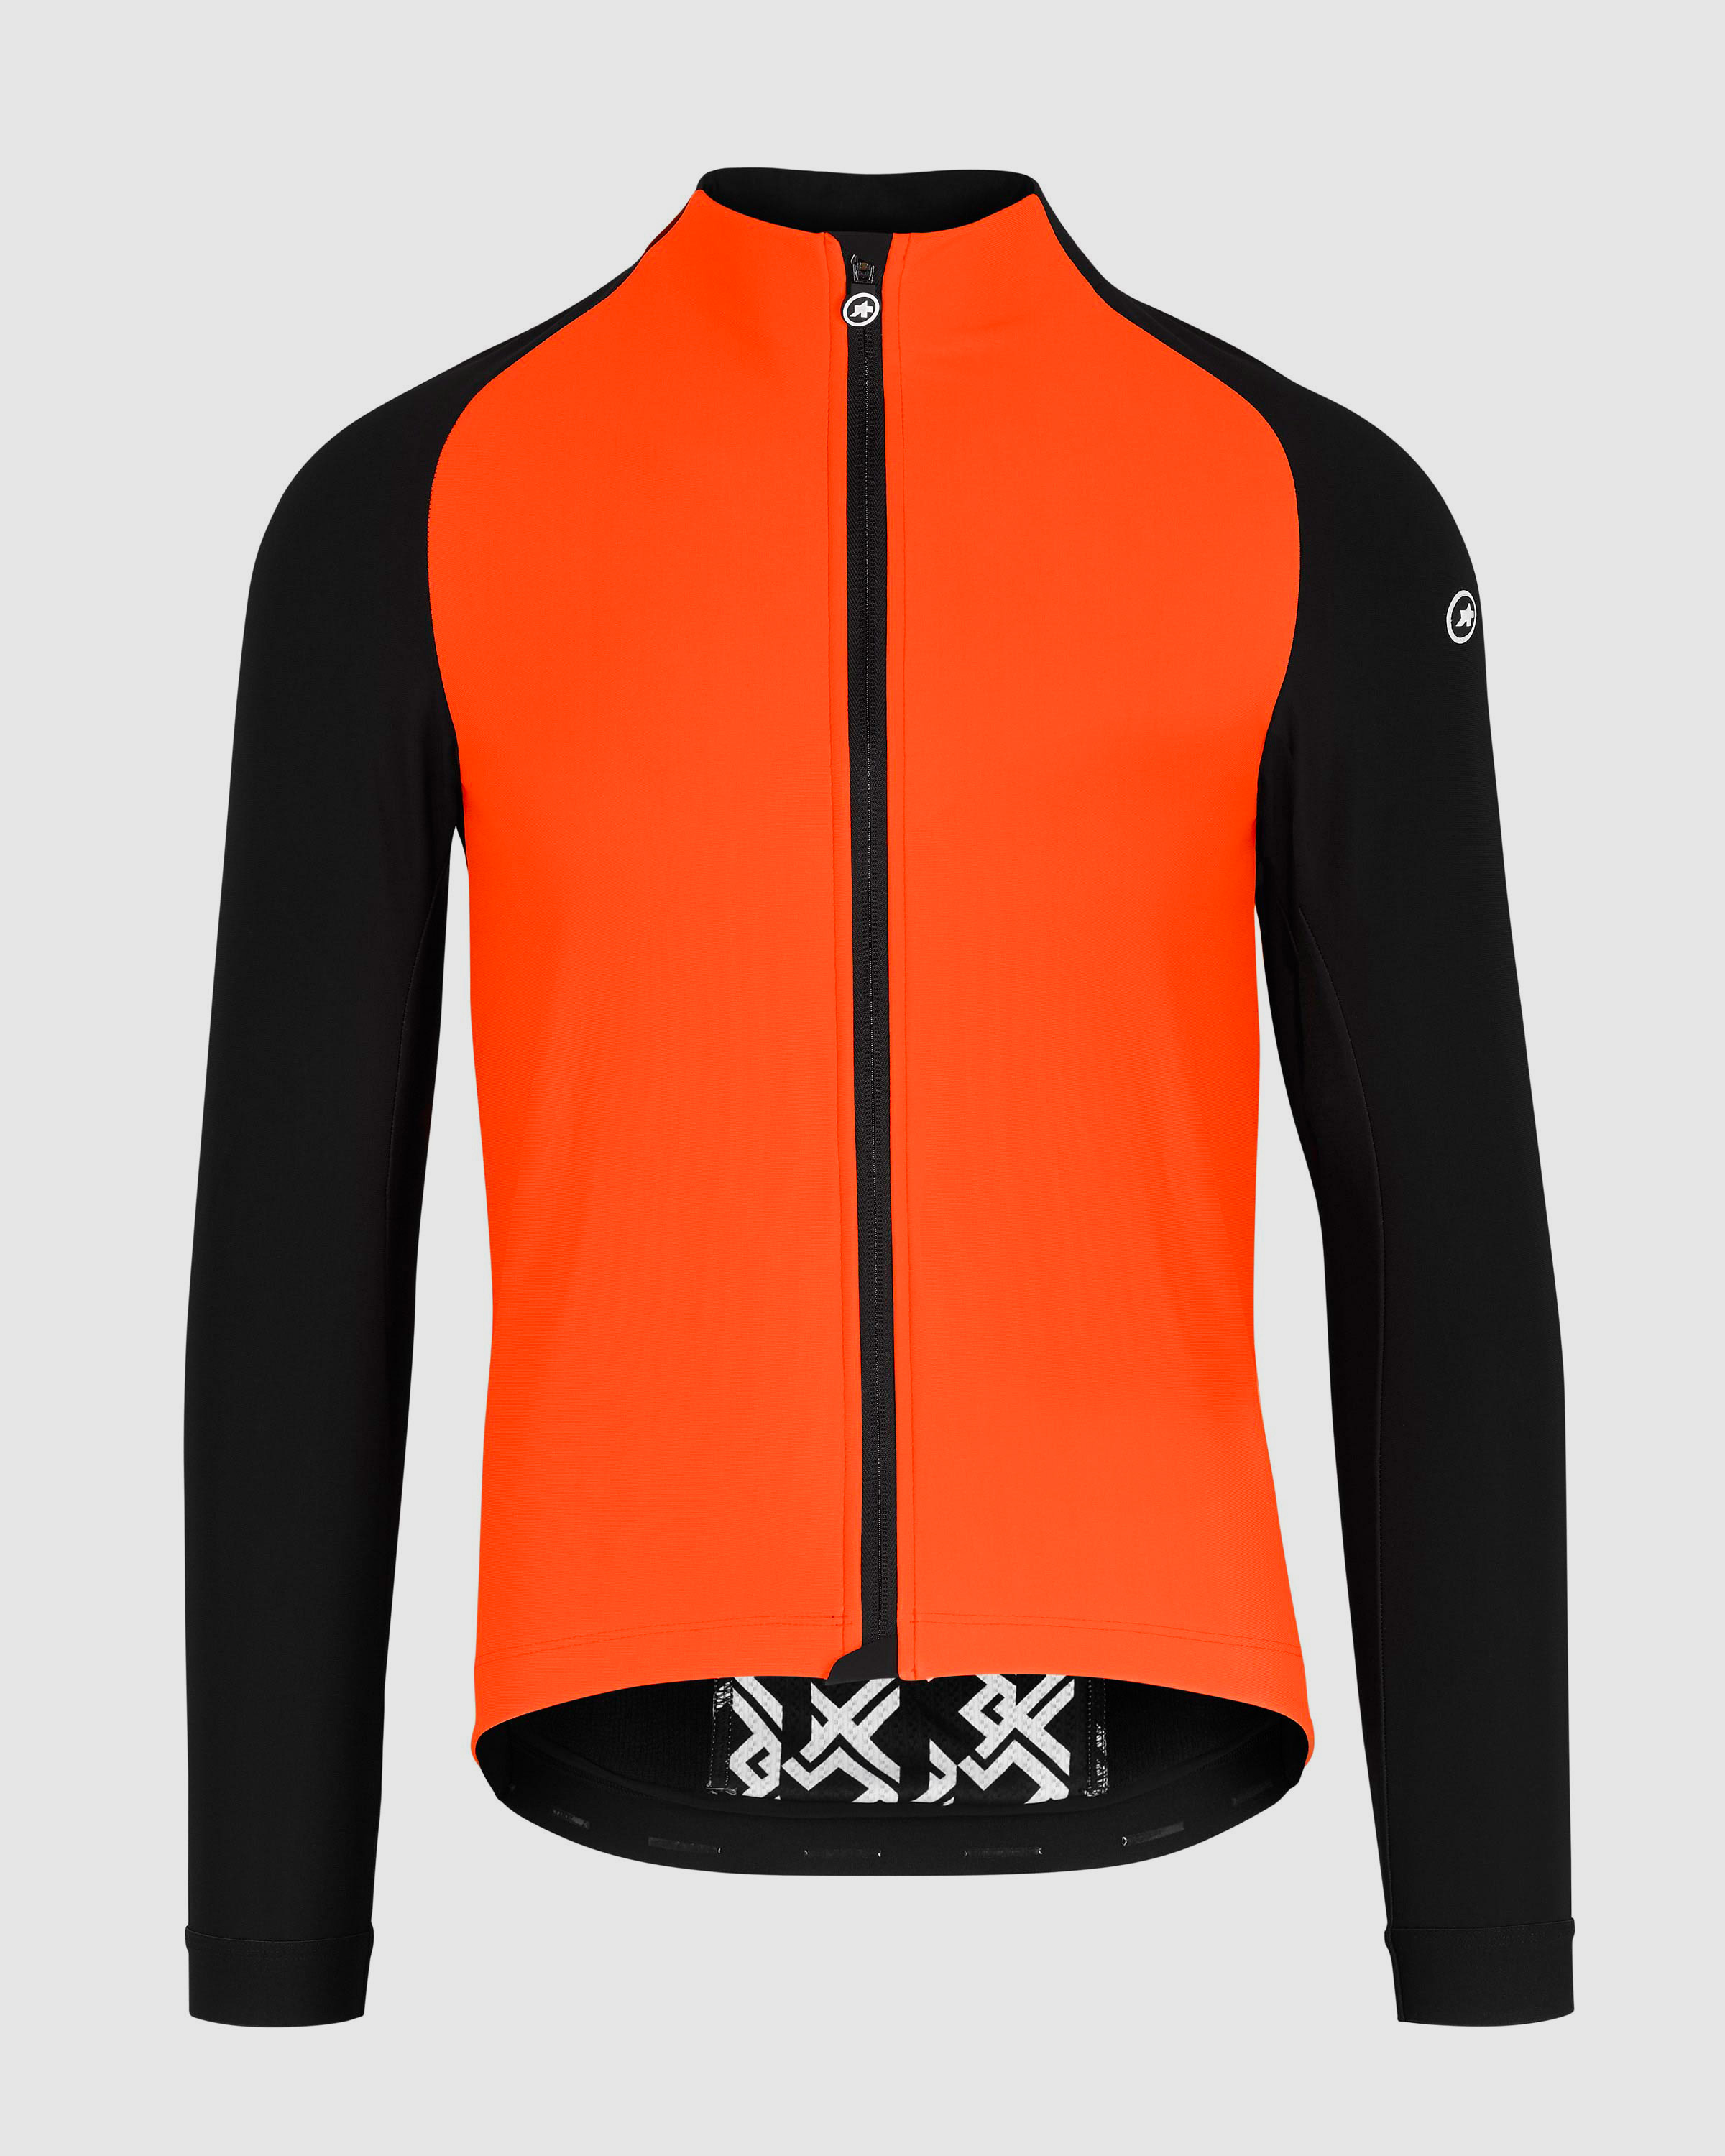 MILLE GT Winter Jacket EVO - ASSOS Of Switzerland - Official Outlet